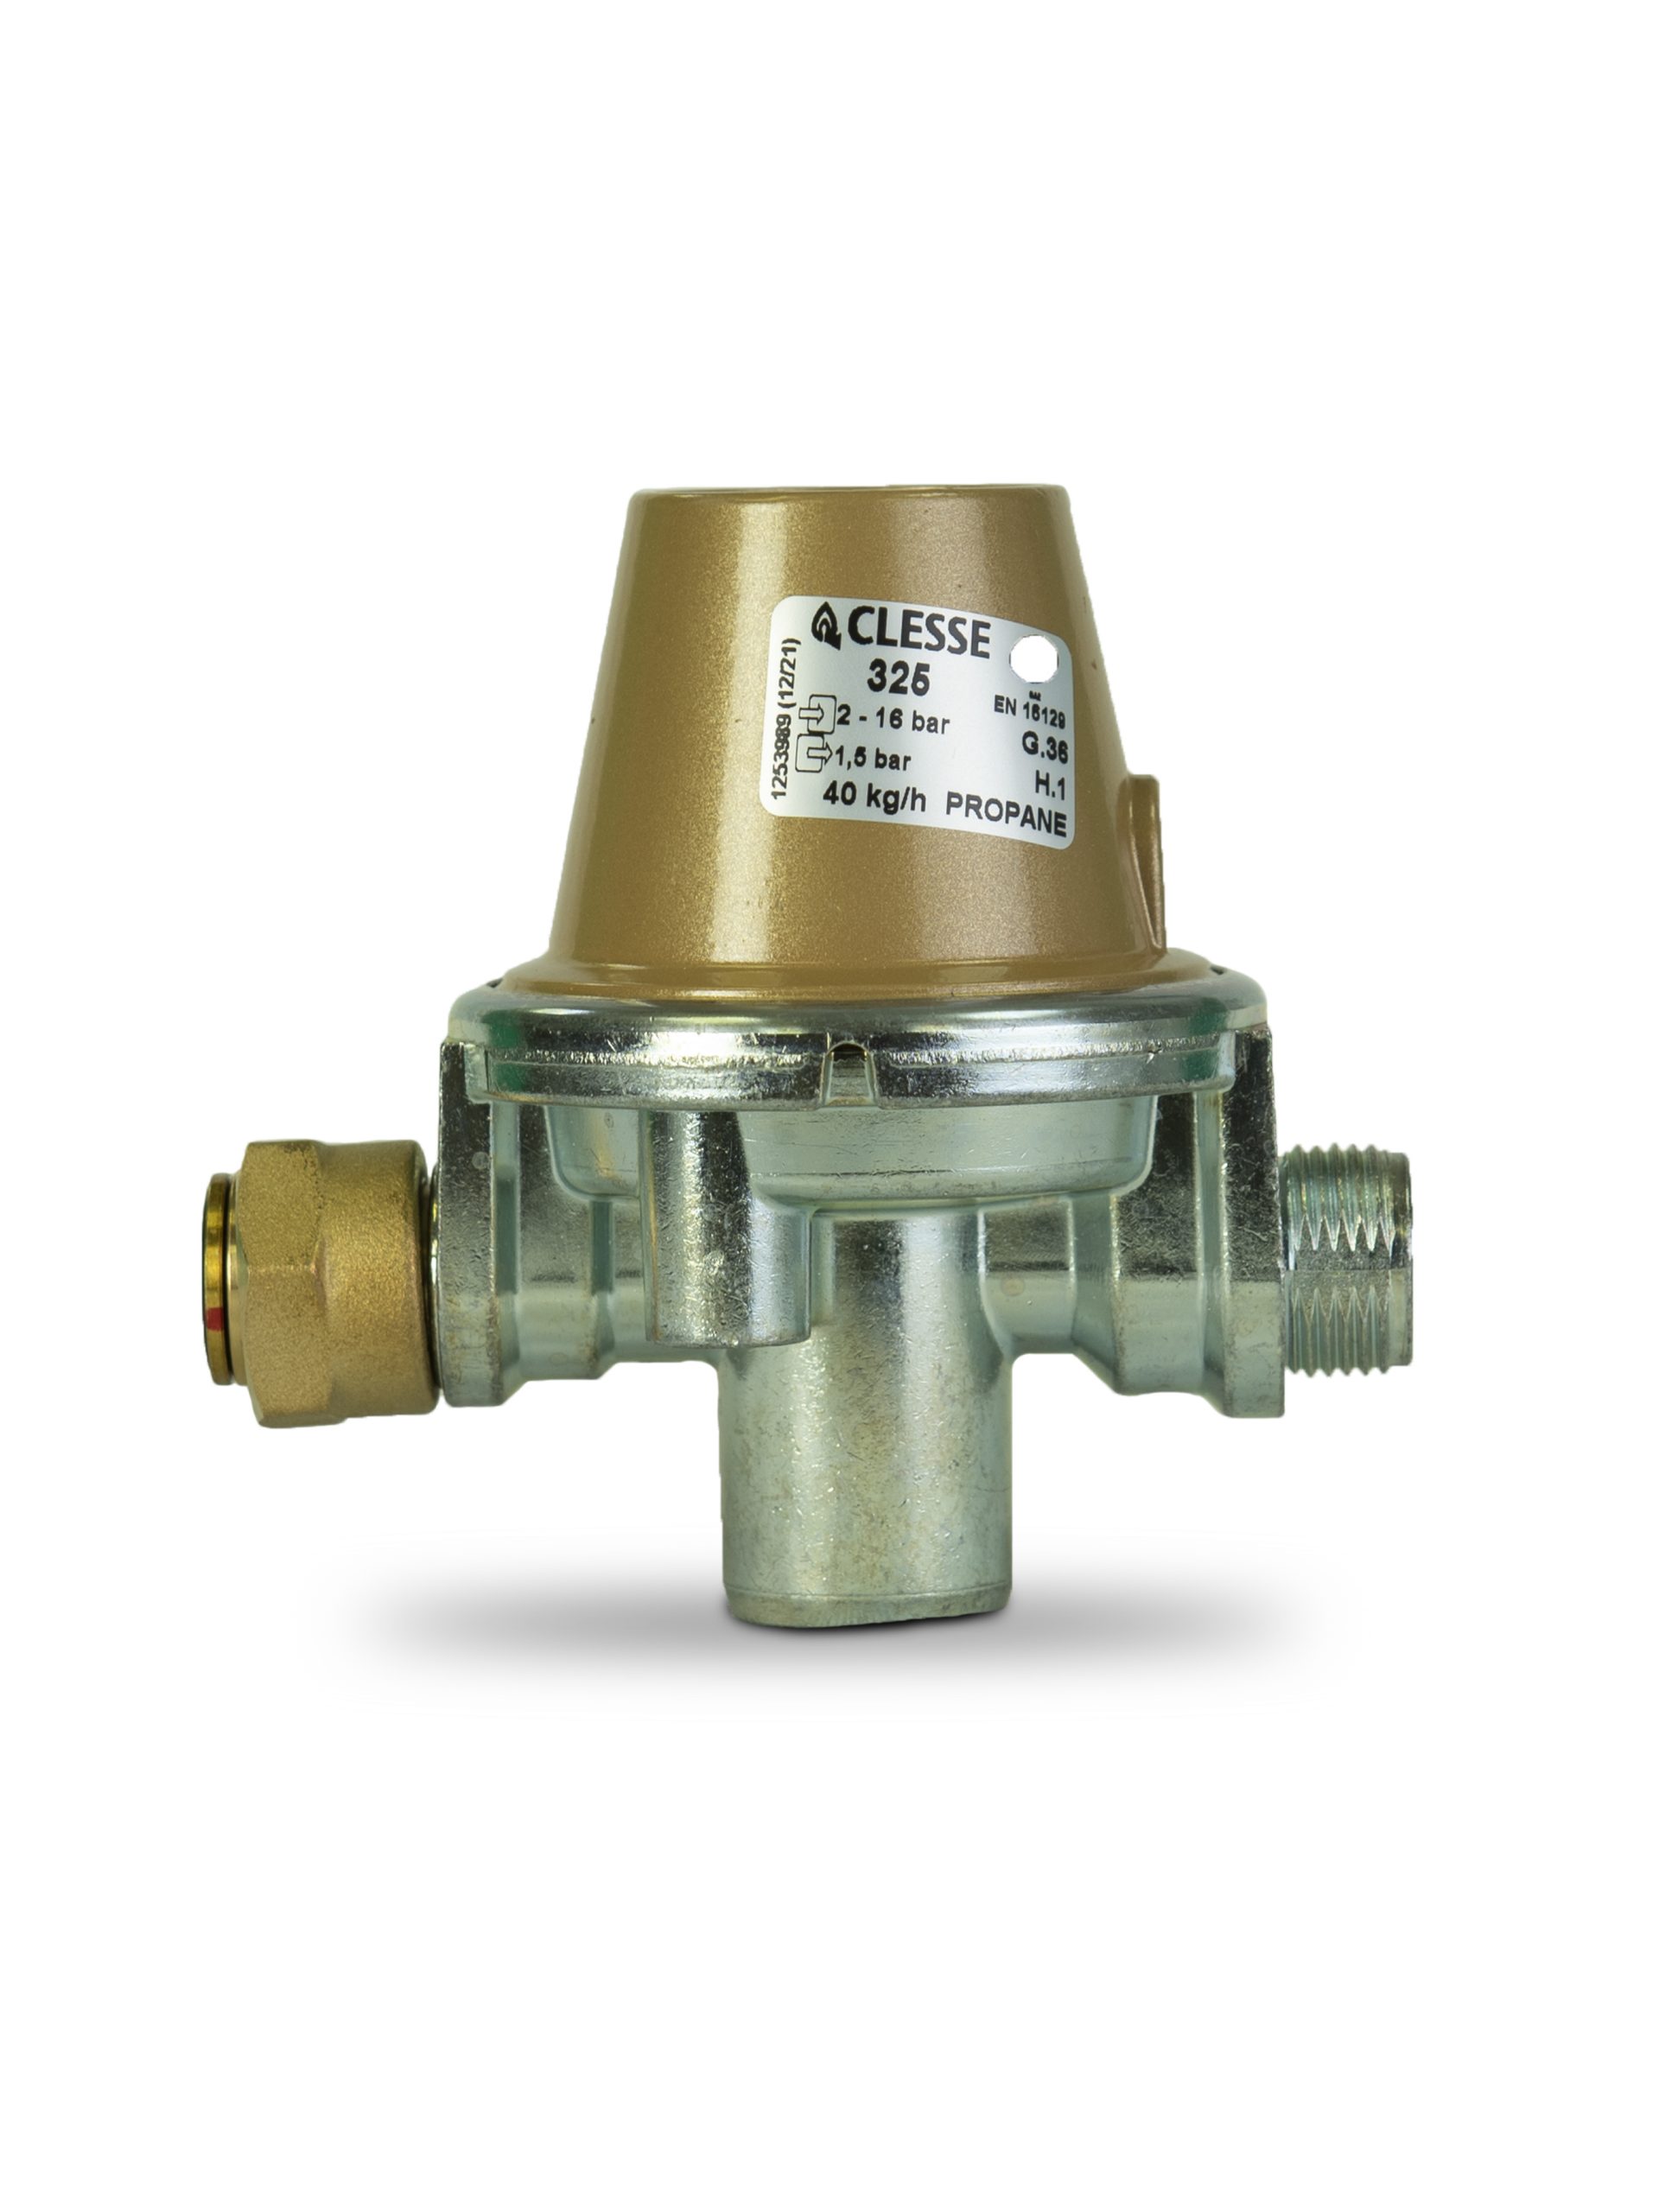 FIRST STAGE ADJUSTABLE REGULATOR 40KG/HR.  P.IN2-16 BAR P.OUT1.5 BAR from Gas Equipment Company Llc Abu Dhabi, UNITED ARAB EMIRATES